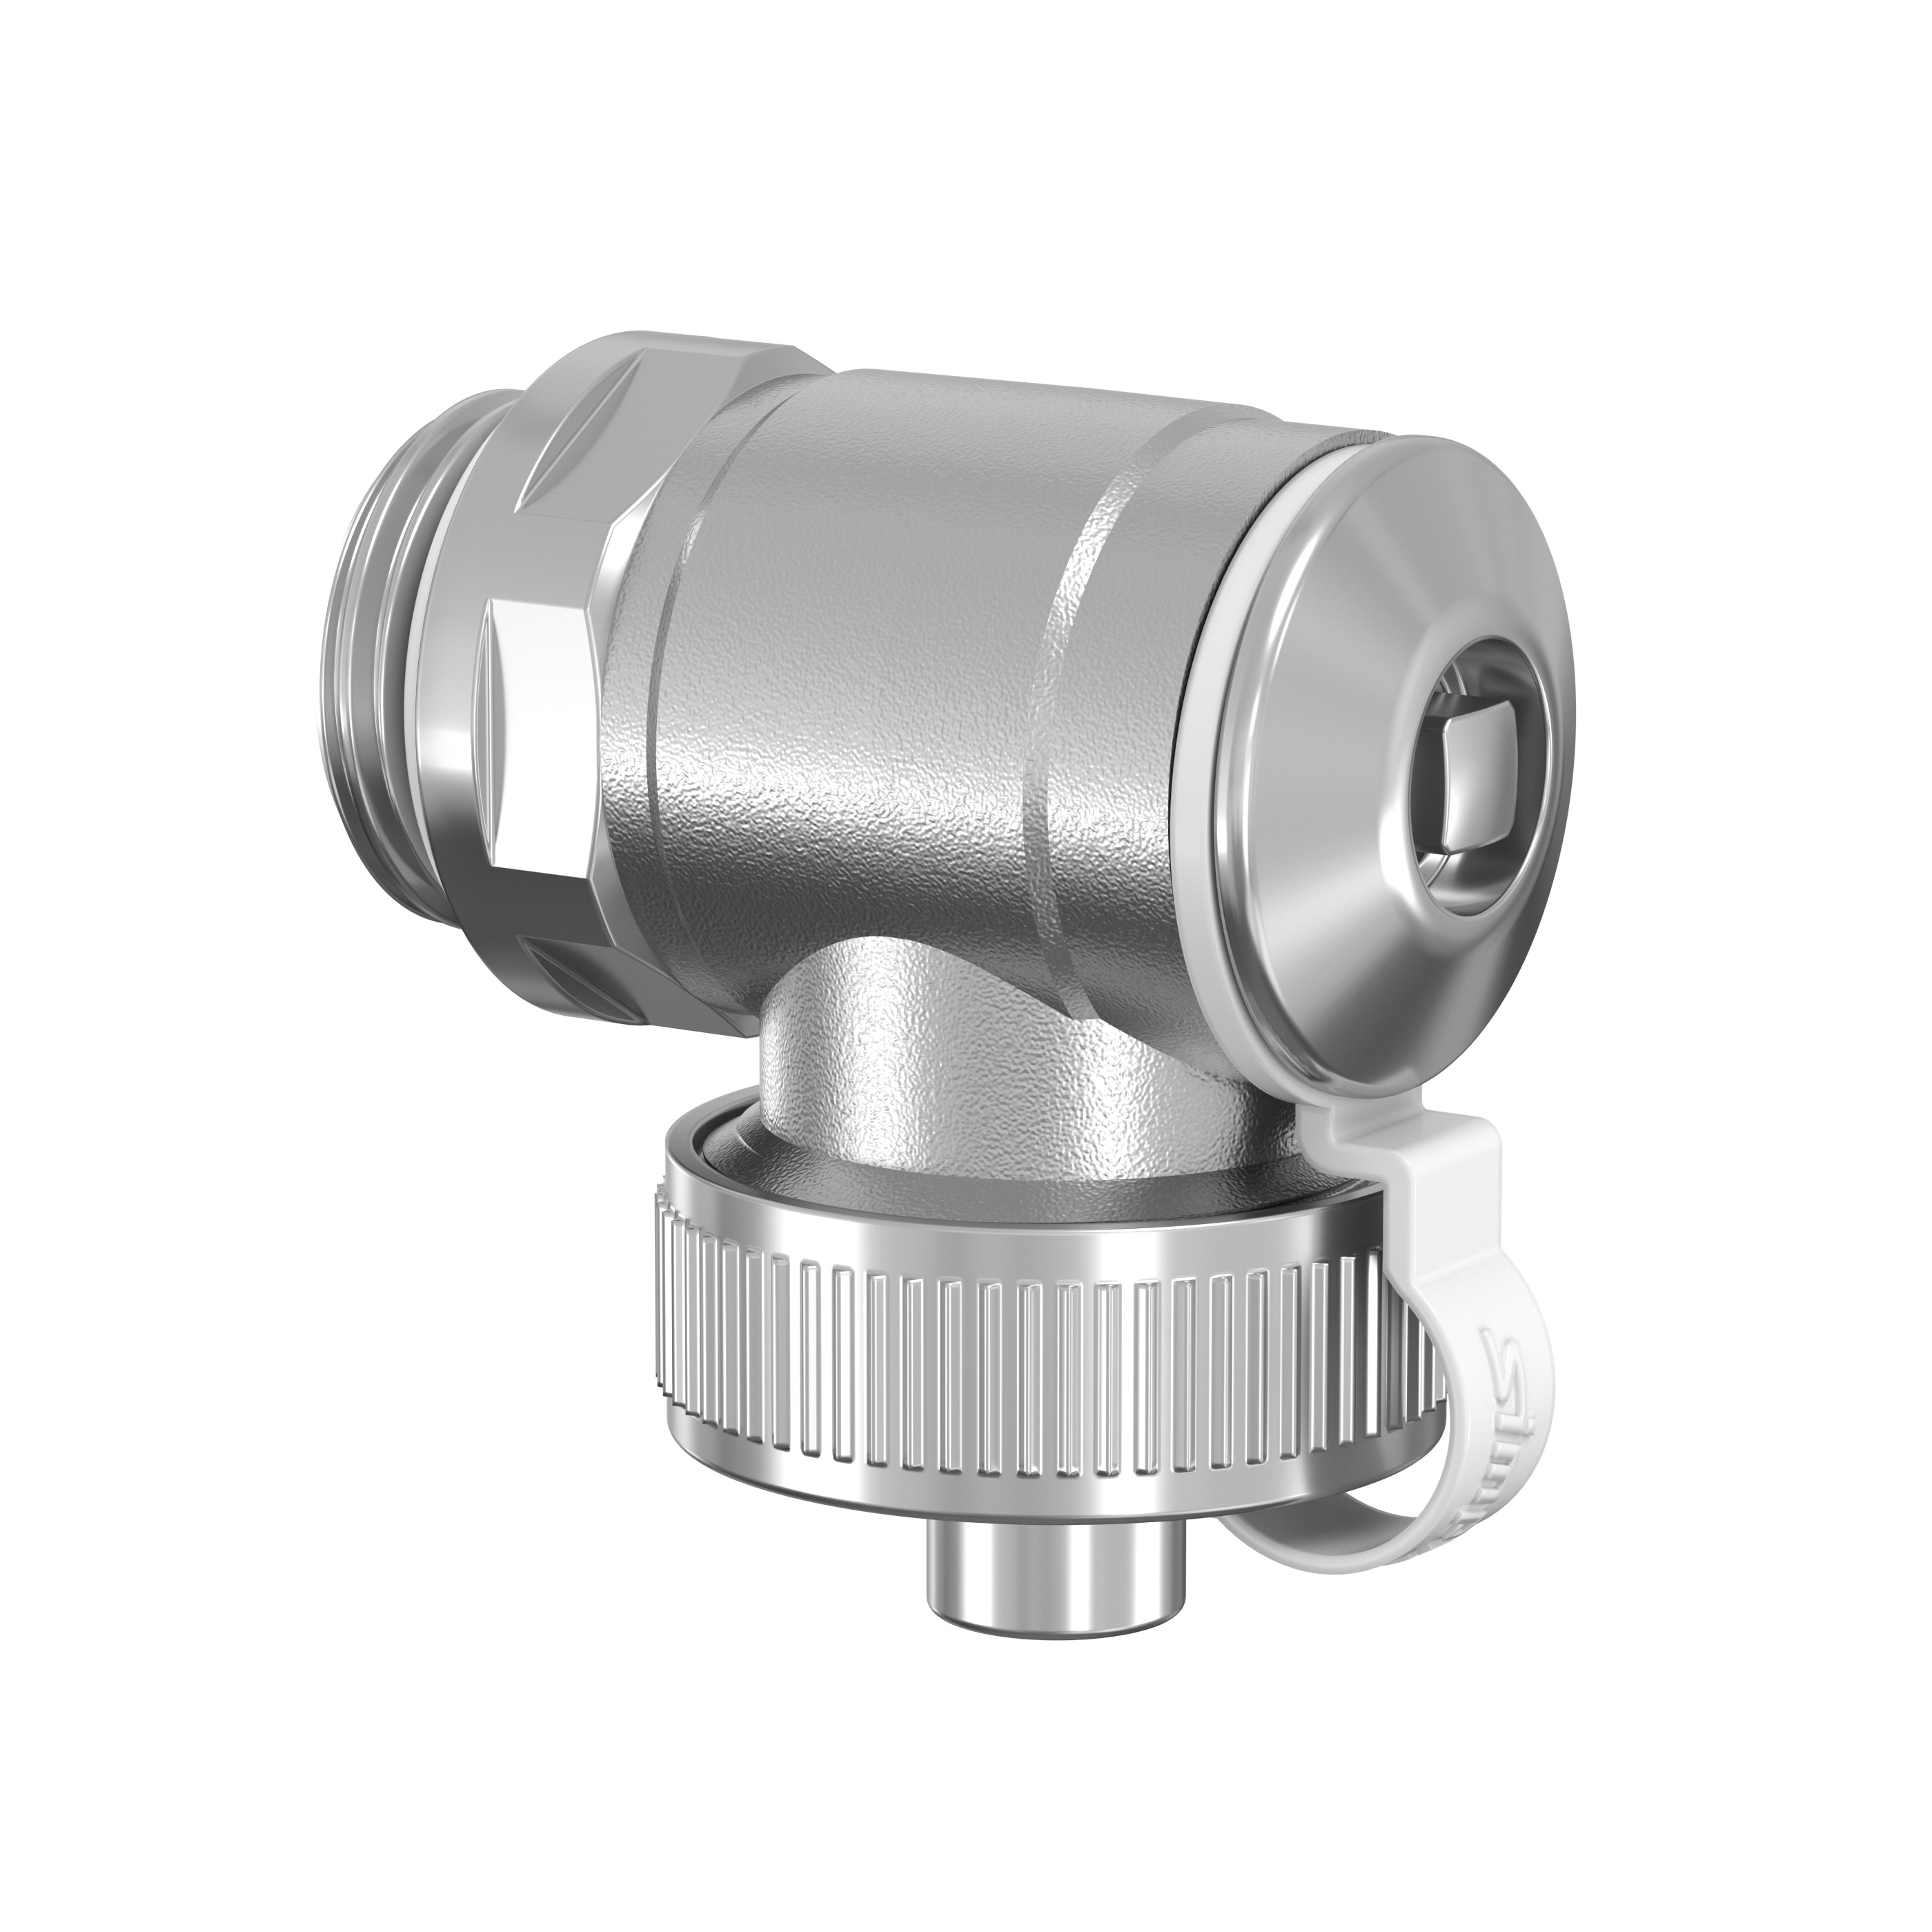 Standard V Fill and Drain Plug, Spout Body in Metal